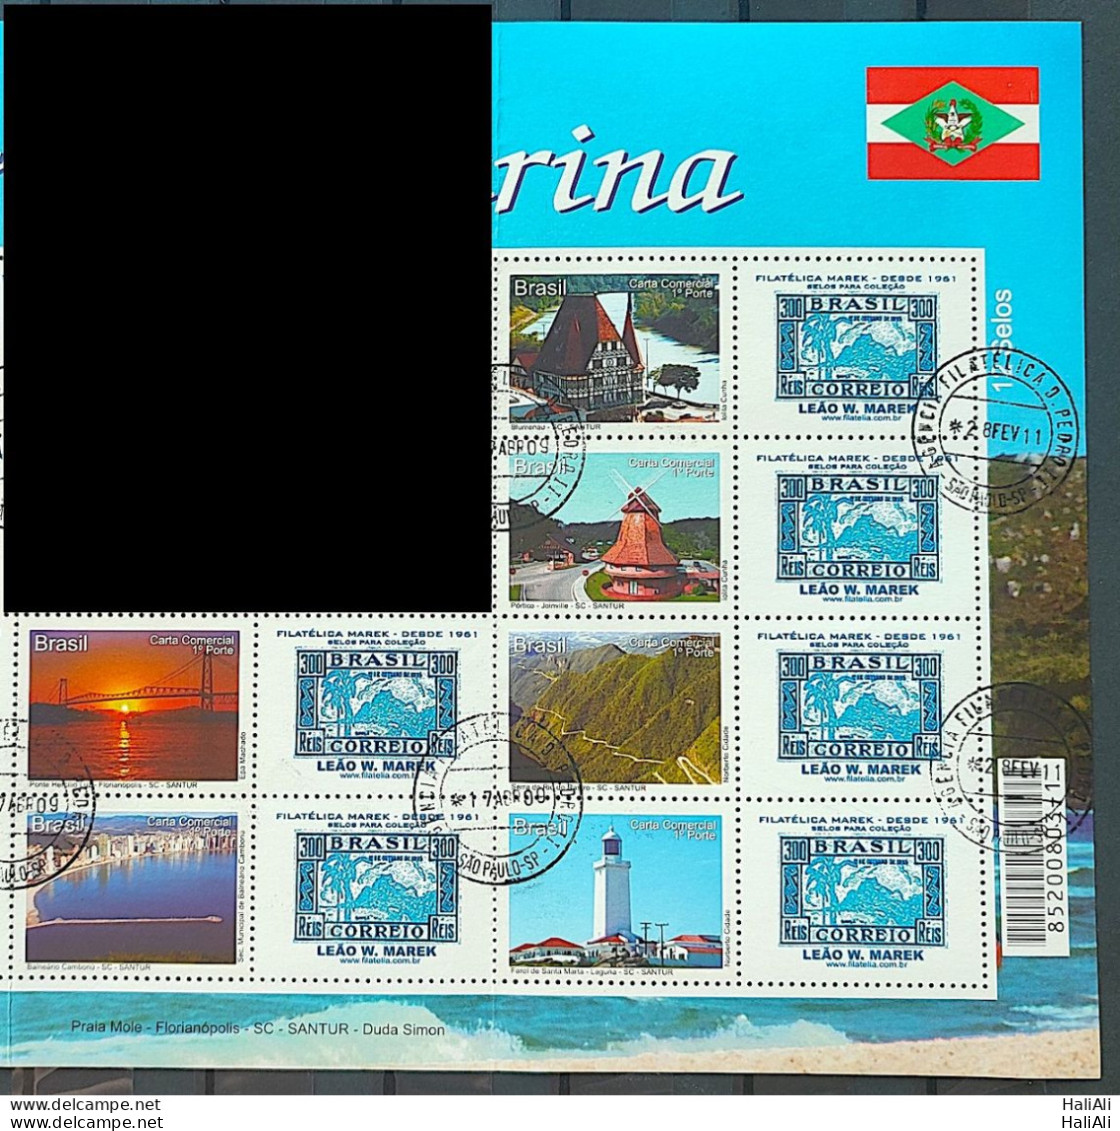 C 2783 Brazil Personalized Stamp Santa Catarina 2009 CPD SP Right Side Od The Sheet Very Rare - Personnalisés